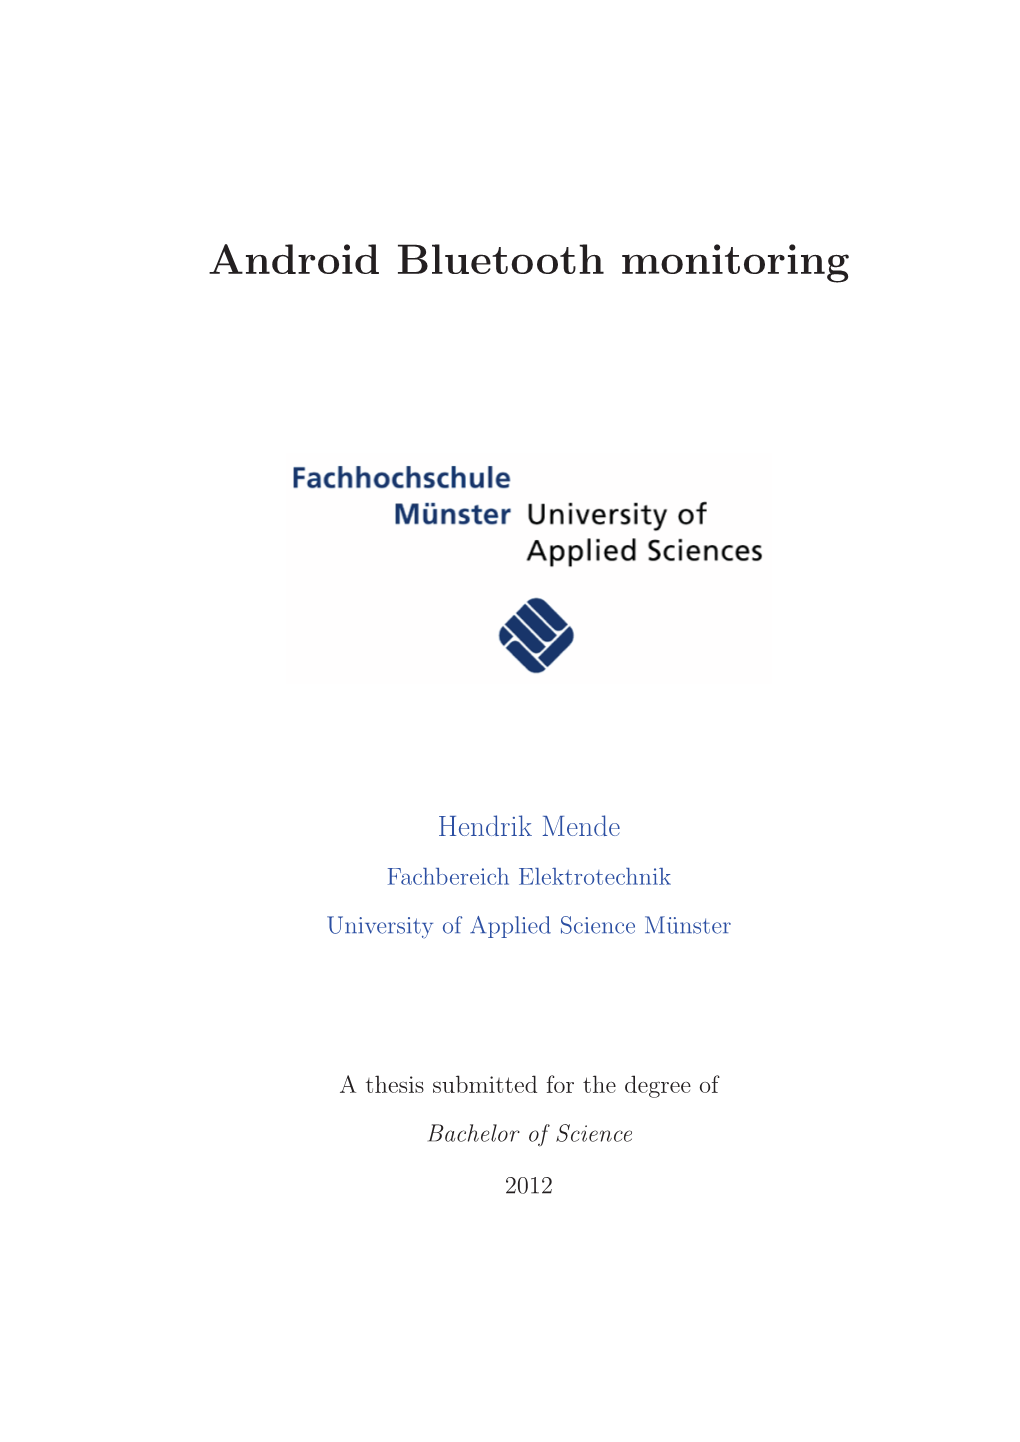 Android Bluetooth Monitoring